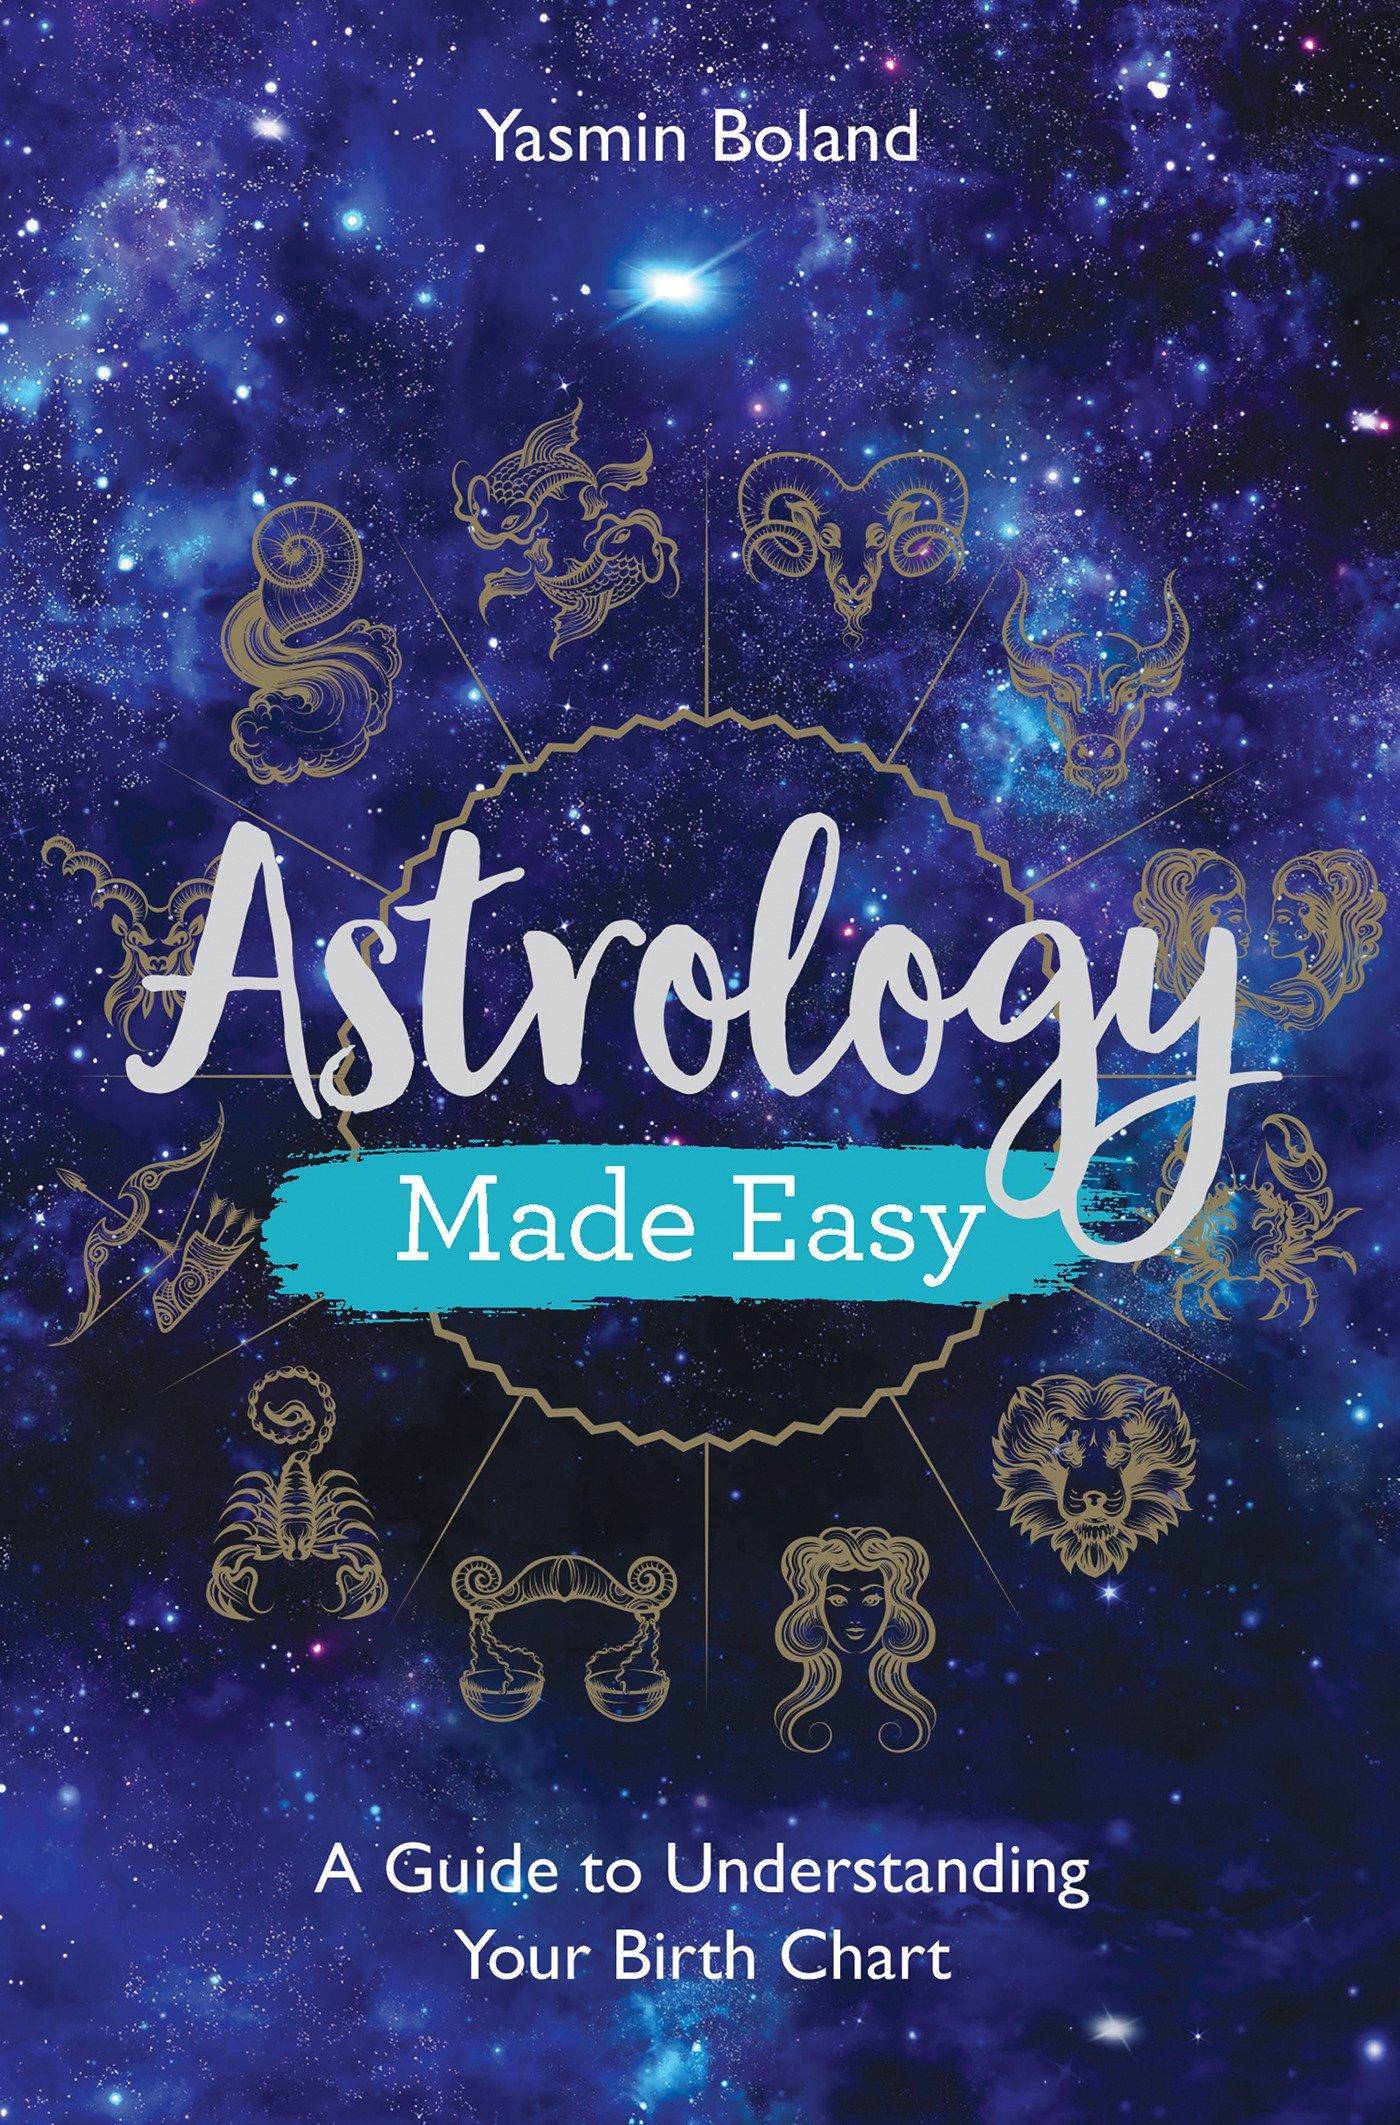 Astrology Made Easy: A Guide to Understanding Your Birth Chart - SureShot Books Publishing LLC